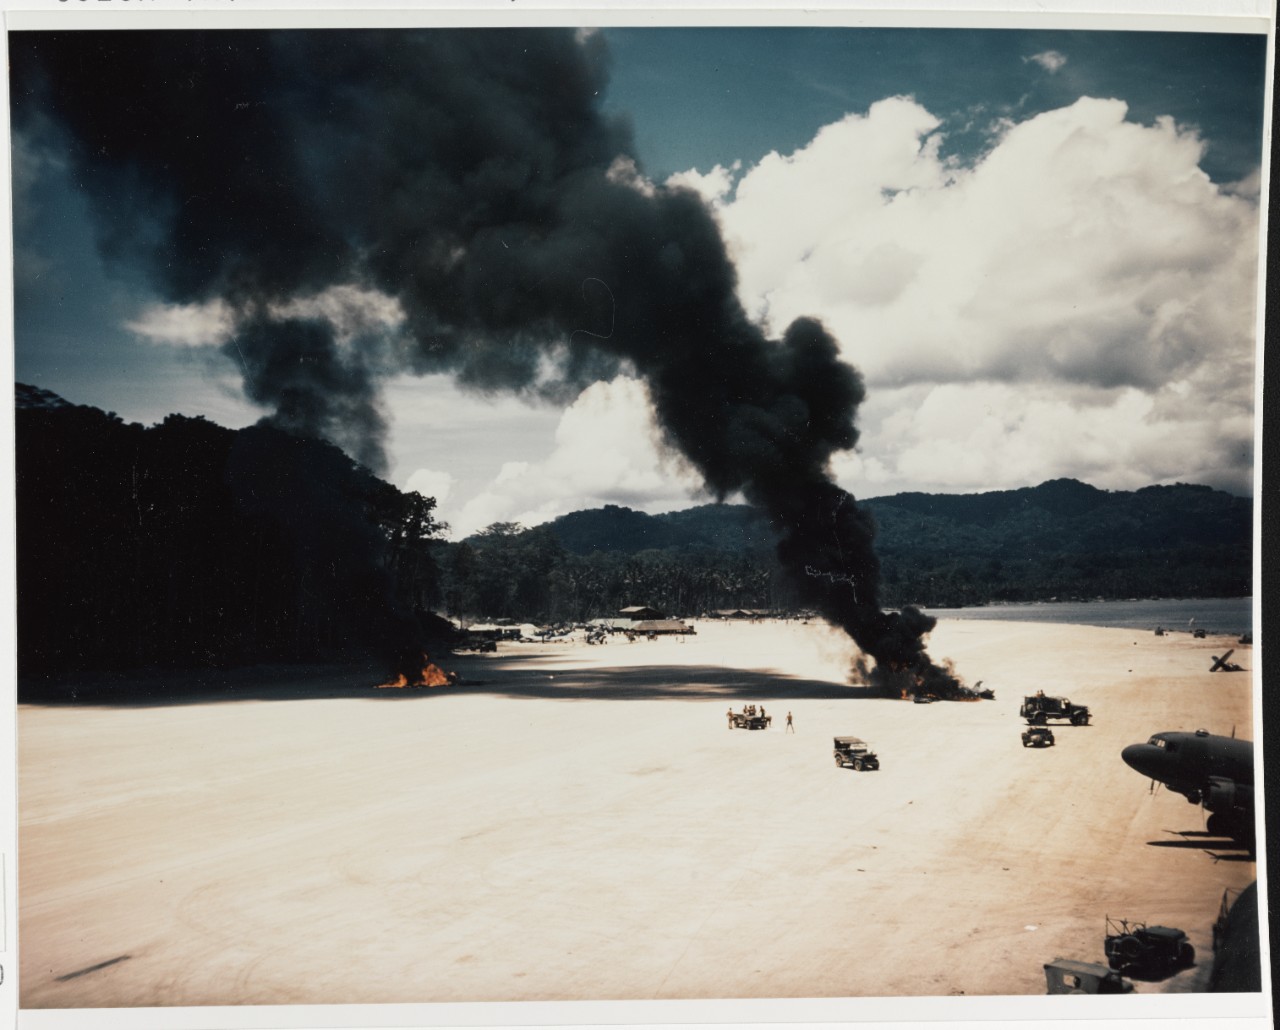 Accident at Vella. Two planes' wreckage burns on the airfield, after a collision, circa 1943-1944